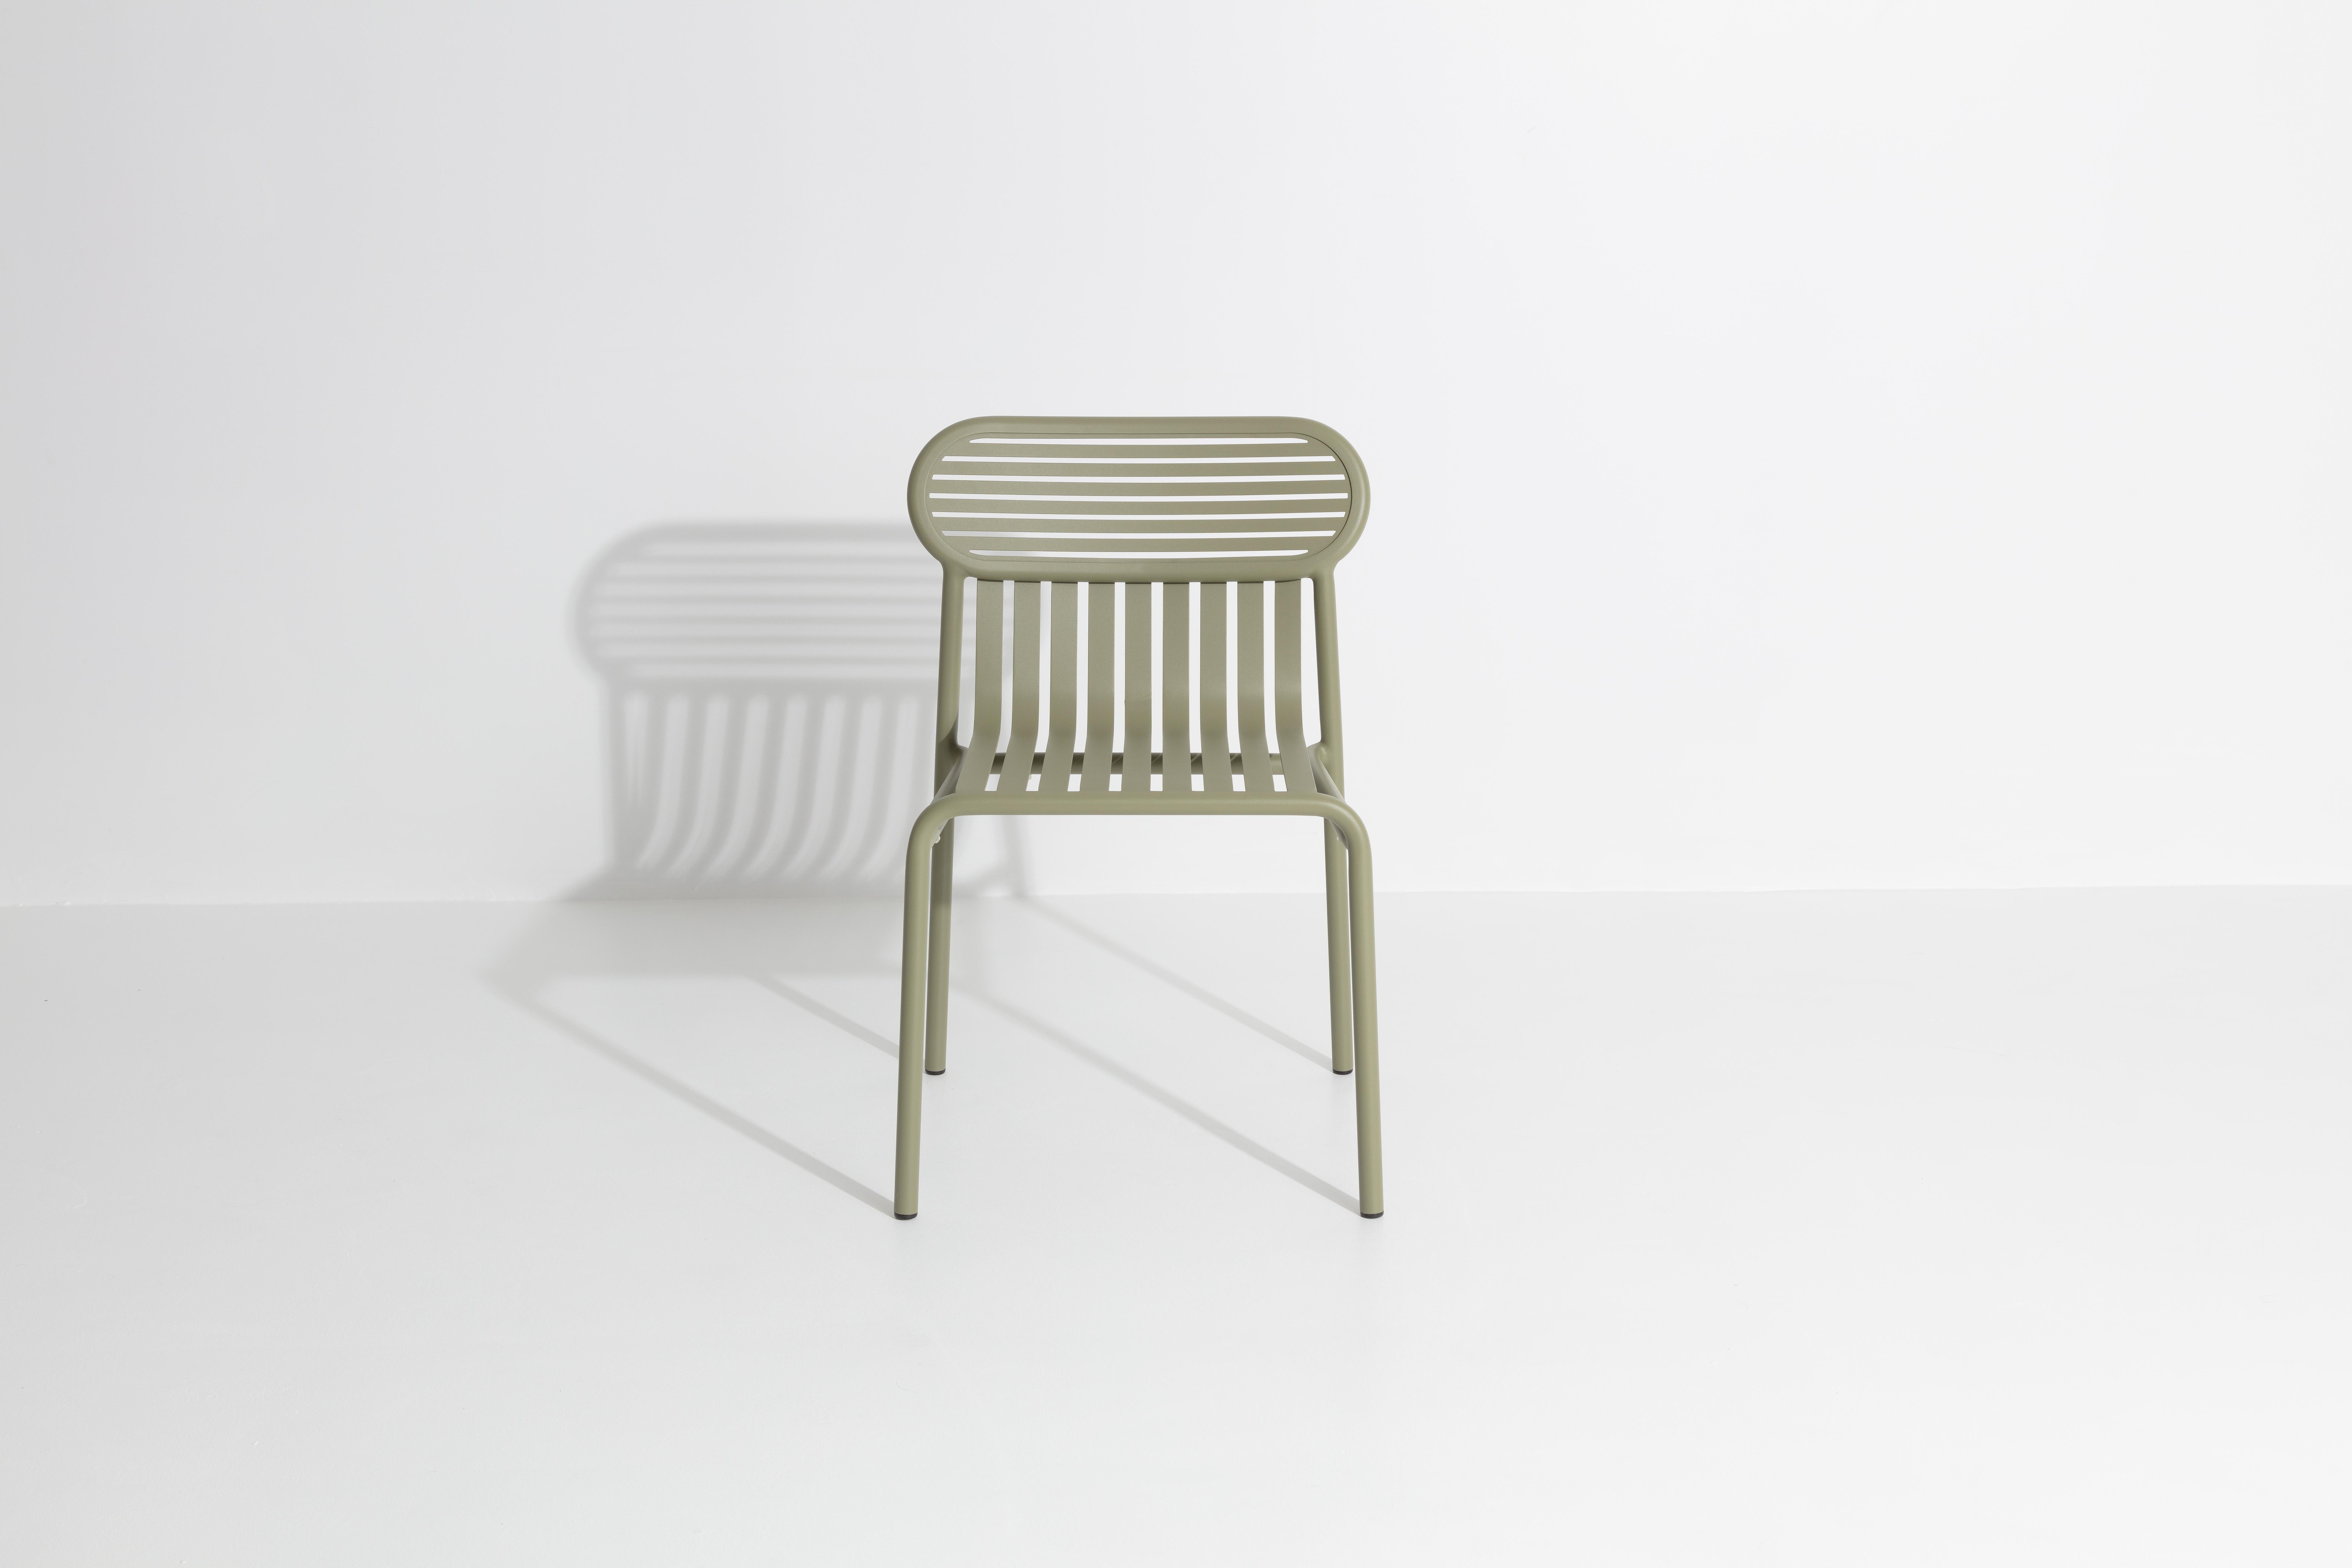 Petite Friture Week-End Chair in Jade Green Aluminium by Studio BrichetZiegler, 2017

The week-end collection is a full range of outdoor furniture, in aluminium grained epoxy paint, matt finish, that includes 18 functions and 8 colours for the